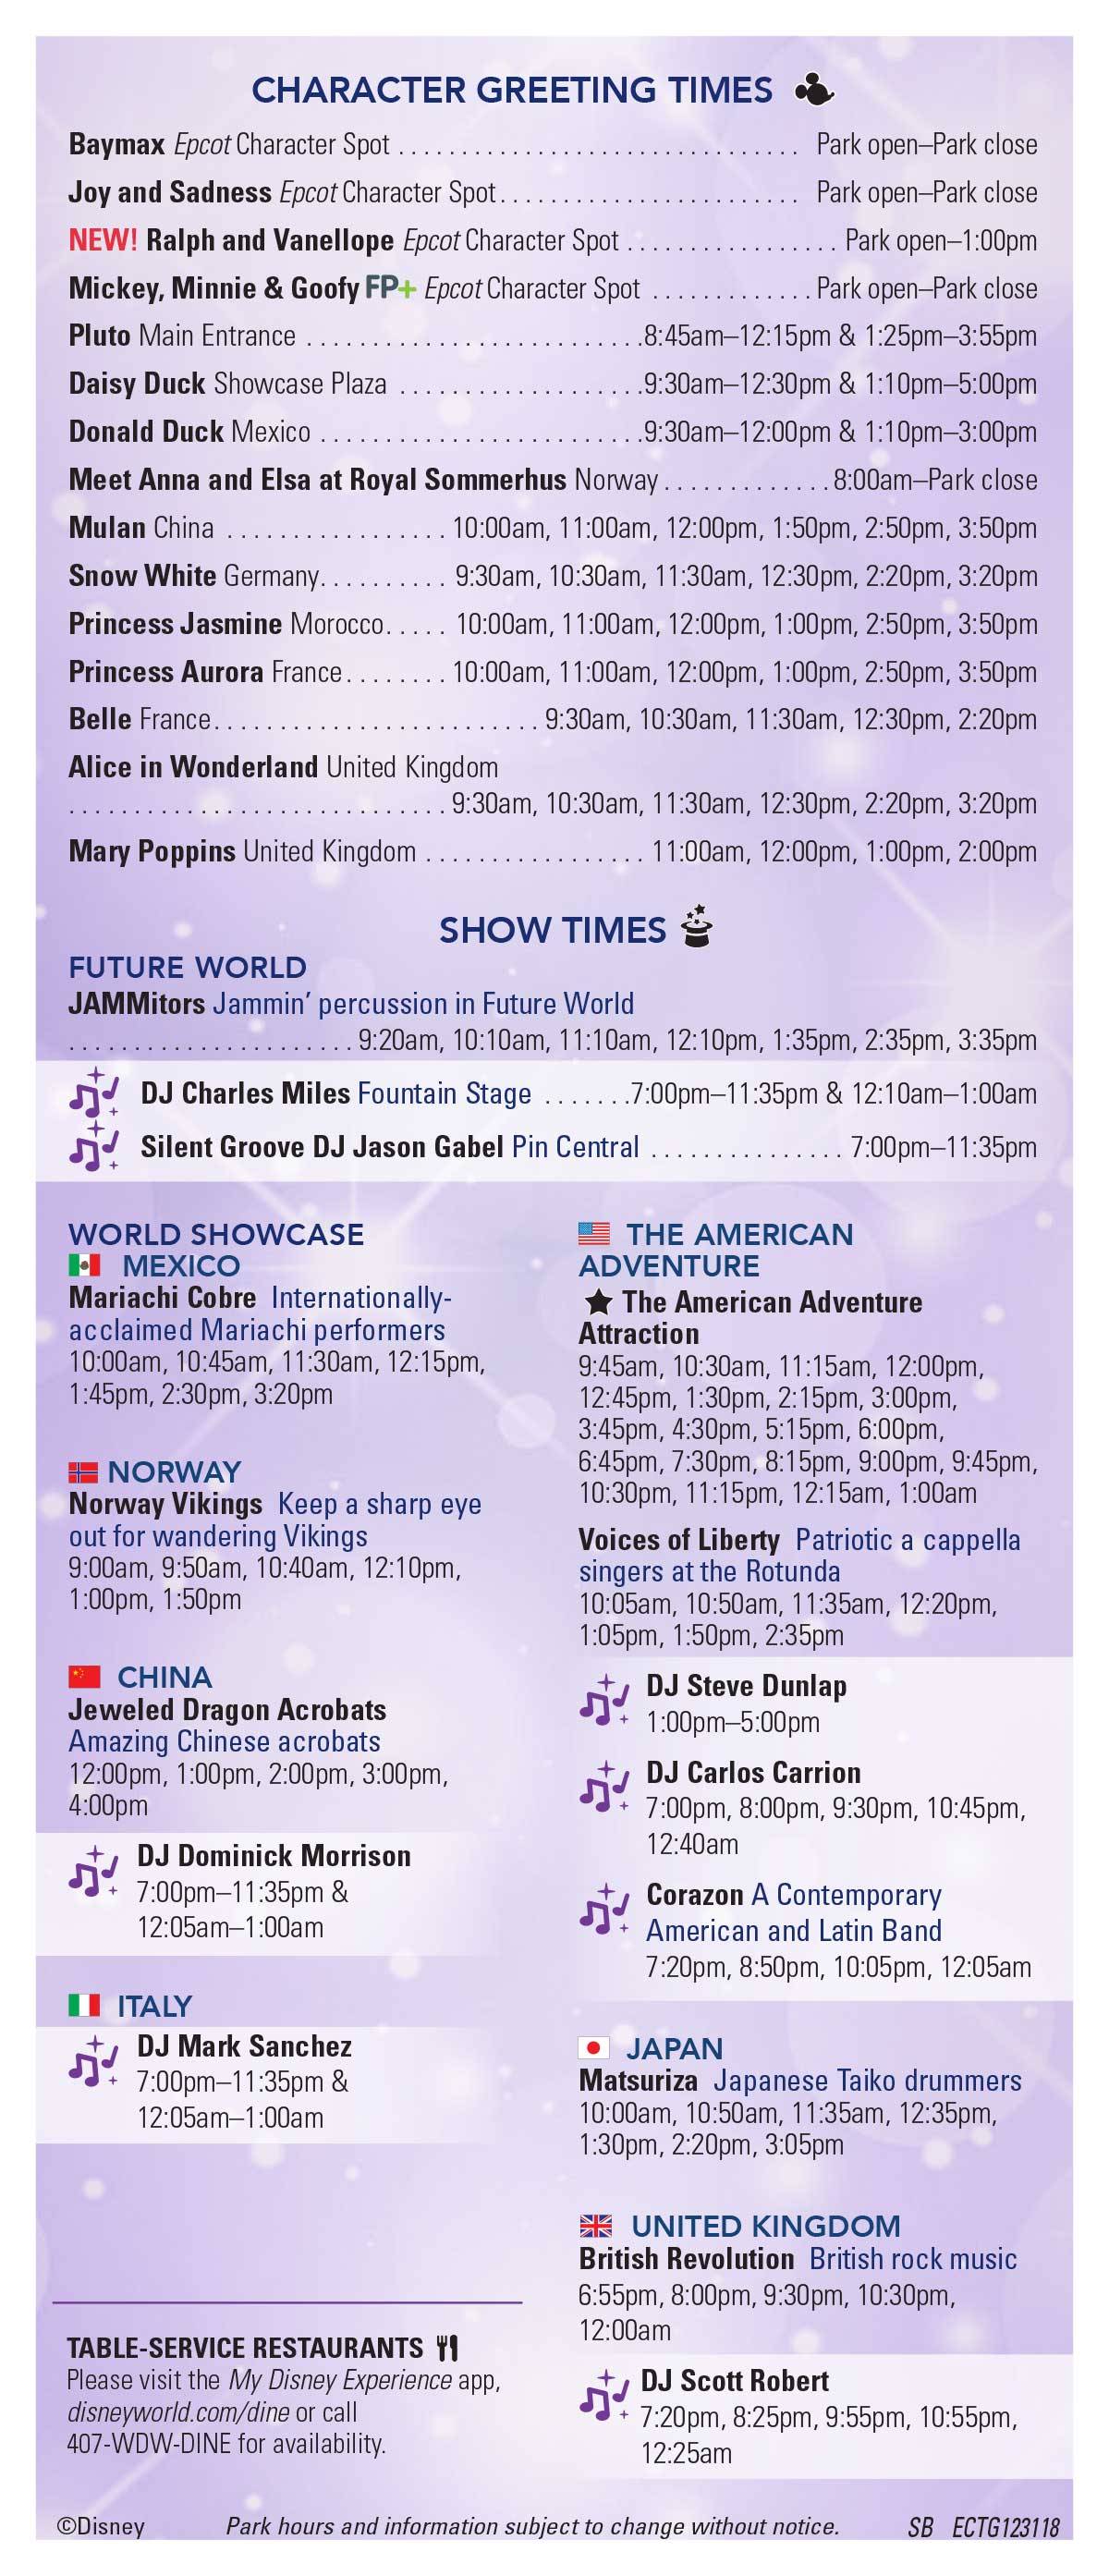 2018 Epcot New Year's Eve Times Guide